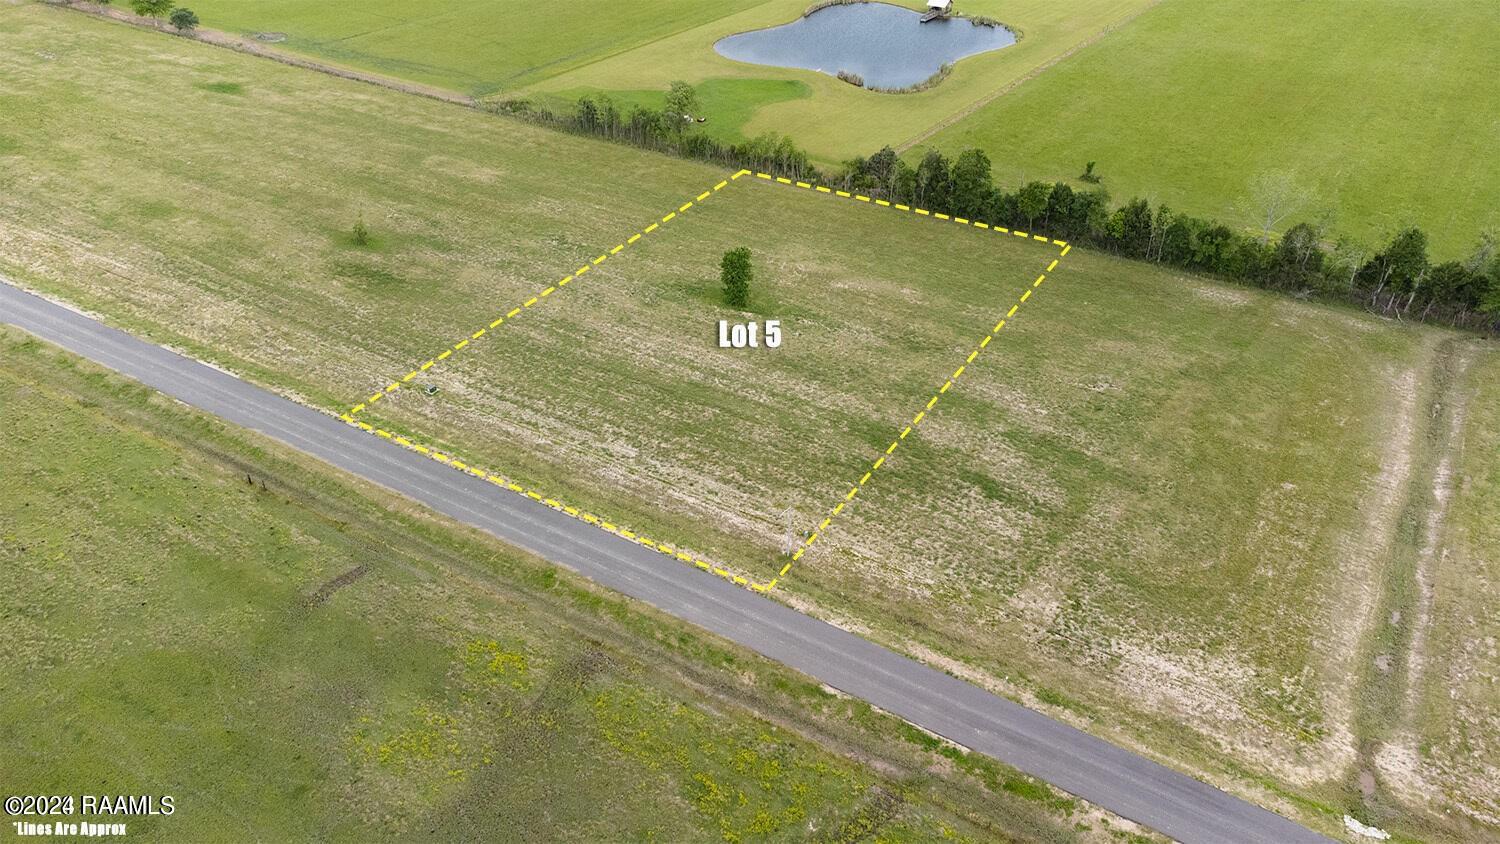 Property Image for Tbd Doc Guidry - Lot 5 Road